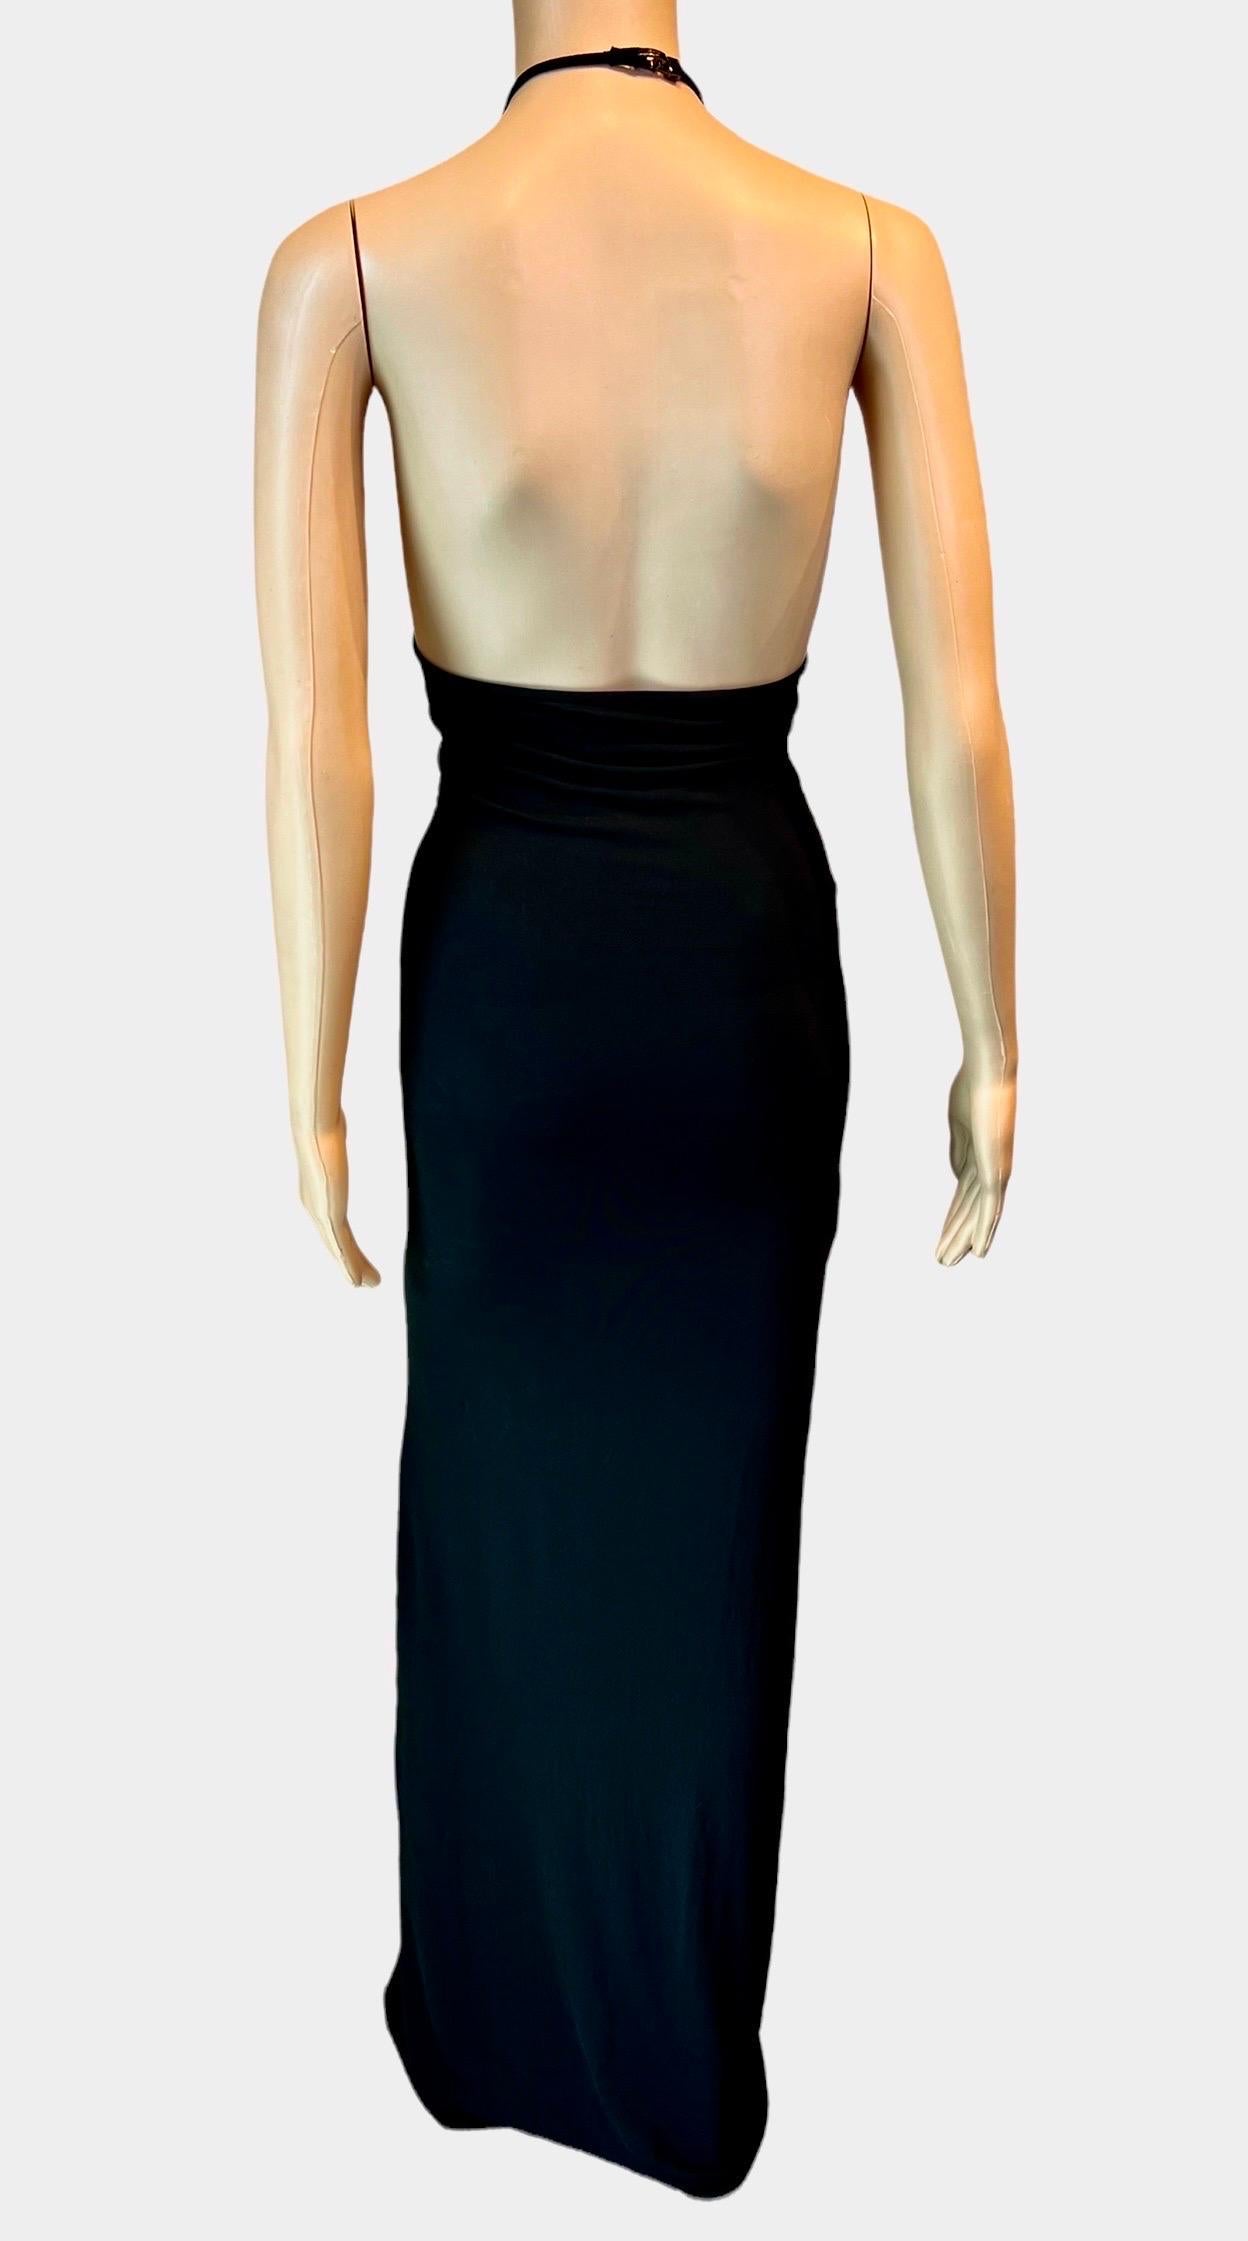 Tom Ford for Gucci F/W 1997 Asymmetrical Halter Bodycon Black Evening Dress Gown For Sale 2